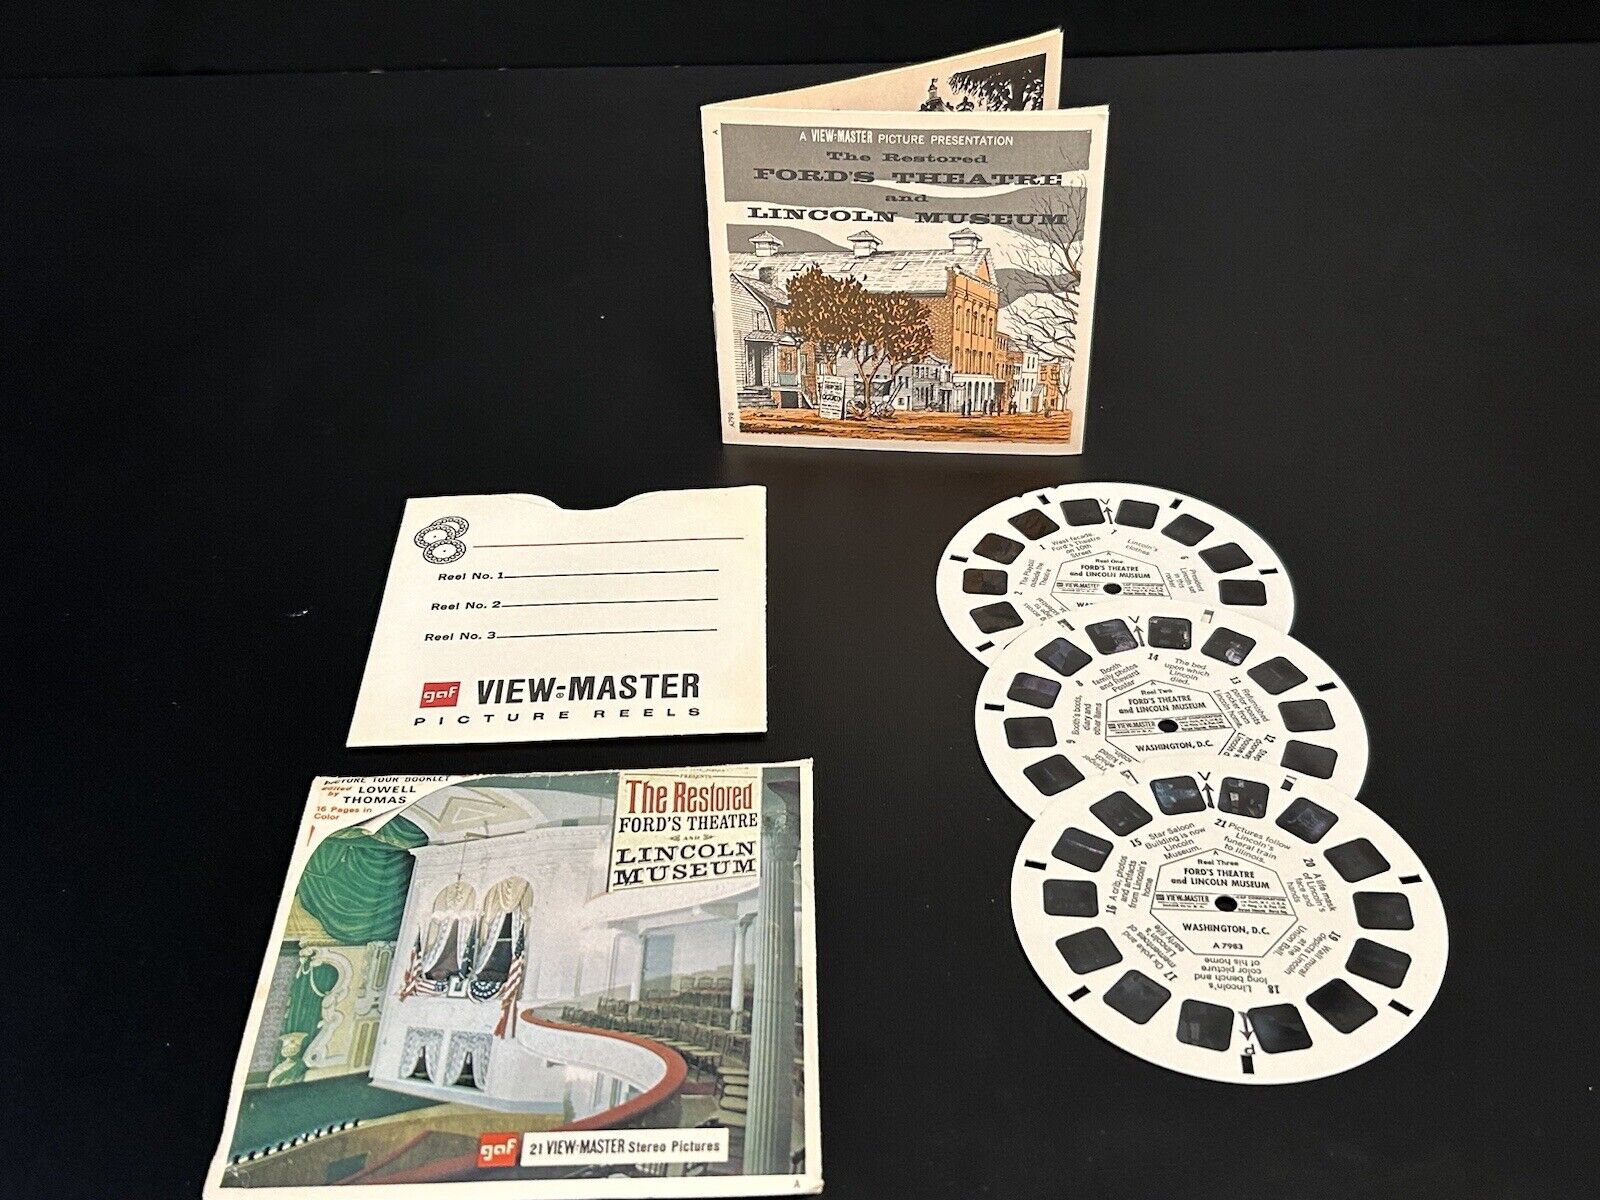 Gaf A798 Restored Ford\'s Theatre & Lincoln Museum D.C. view-master Reels Packet